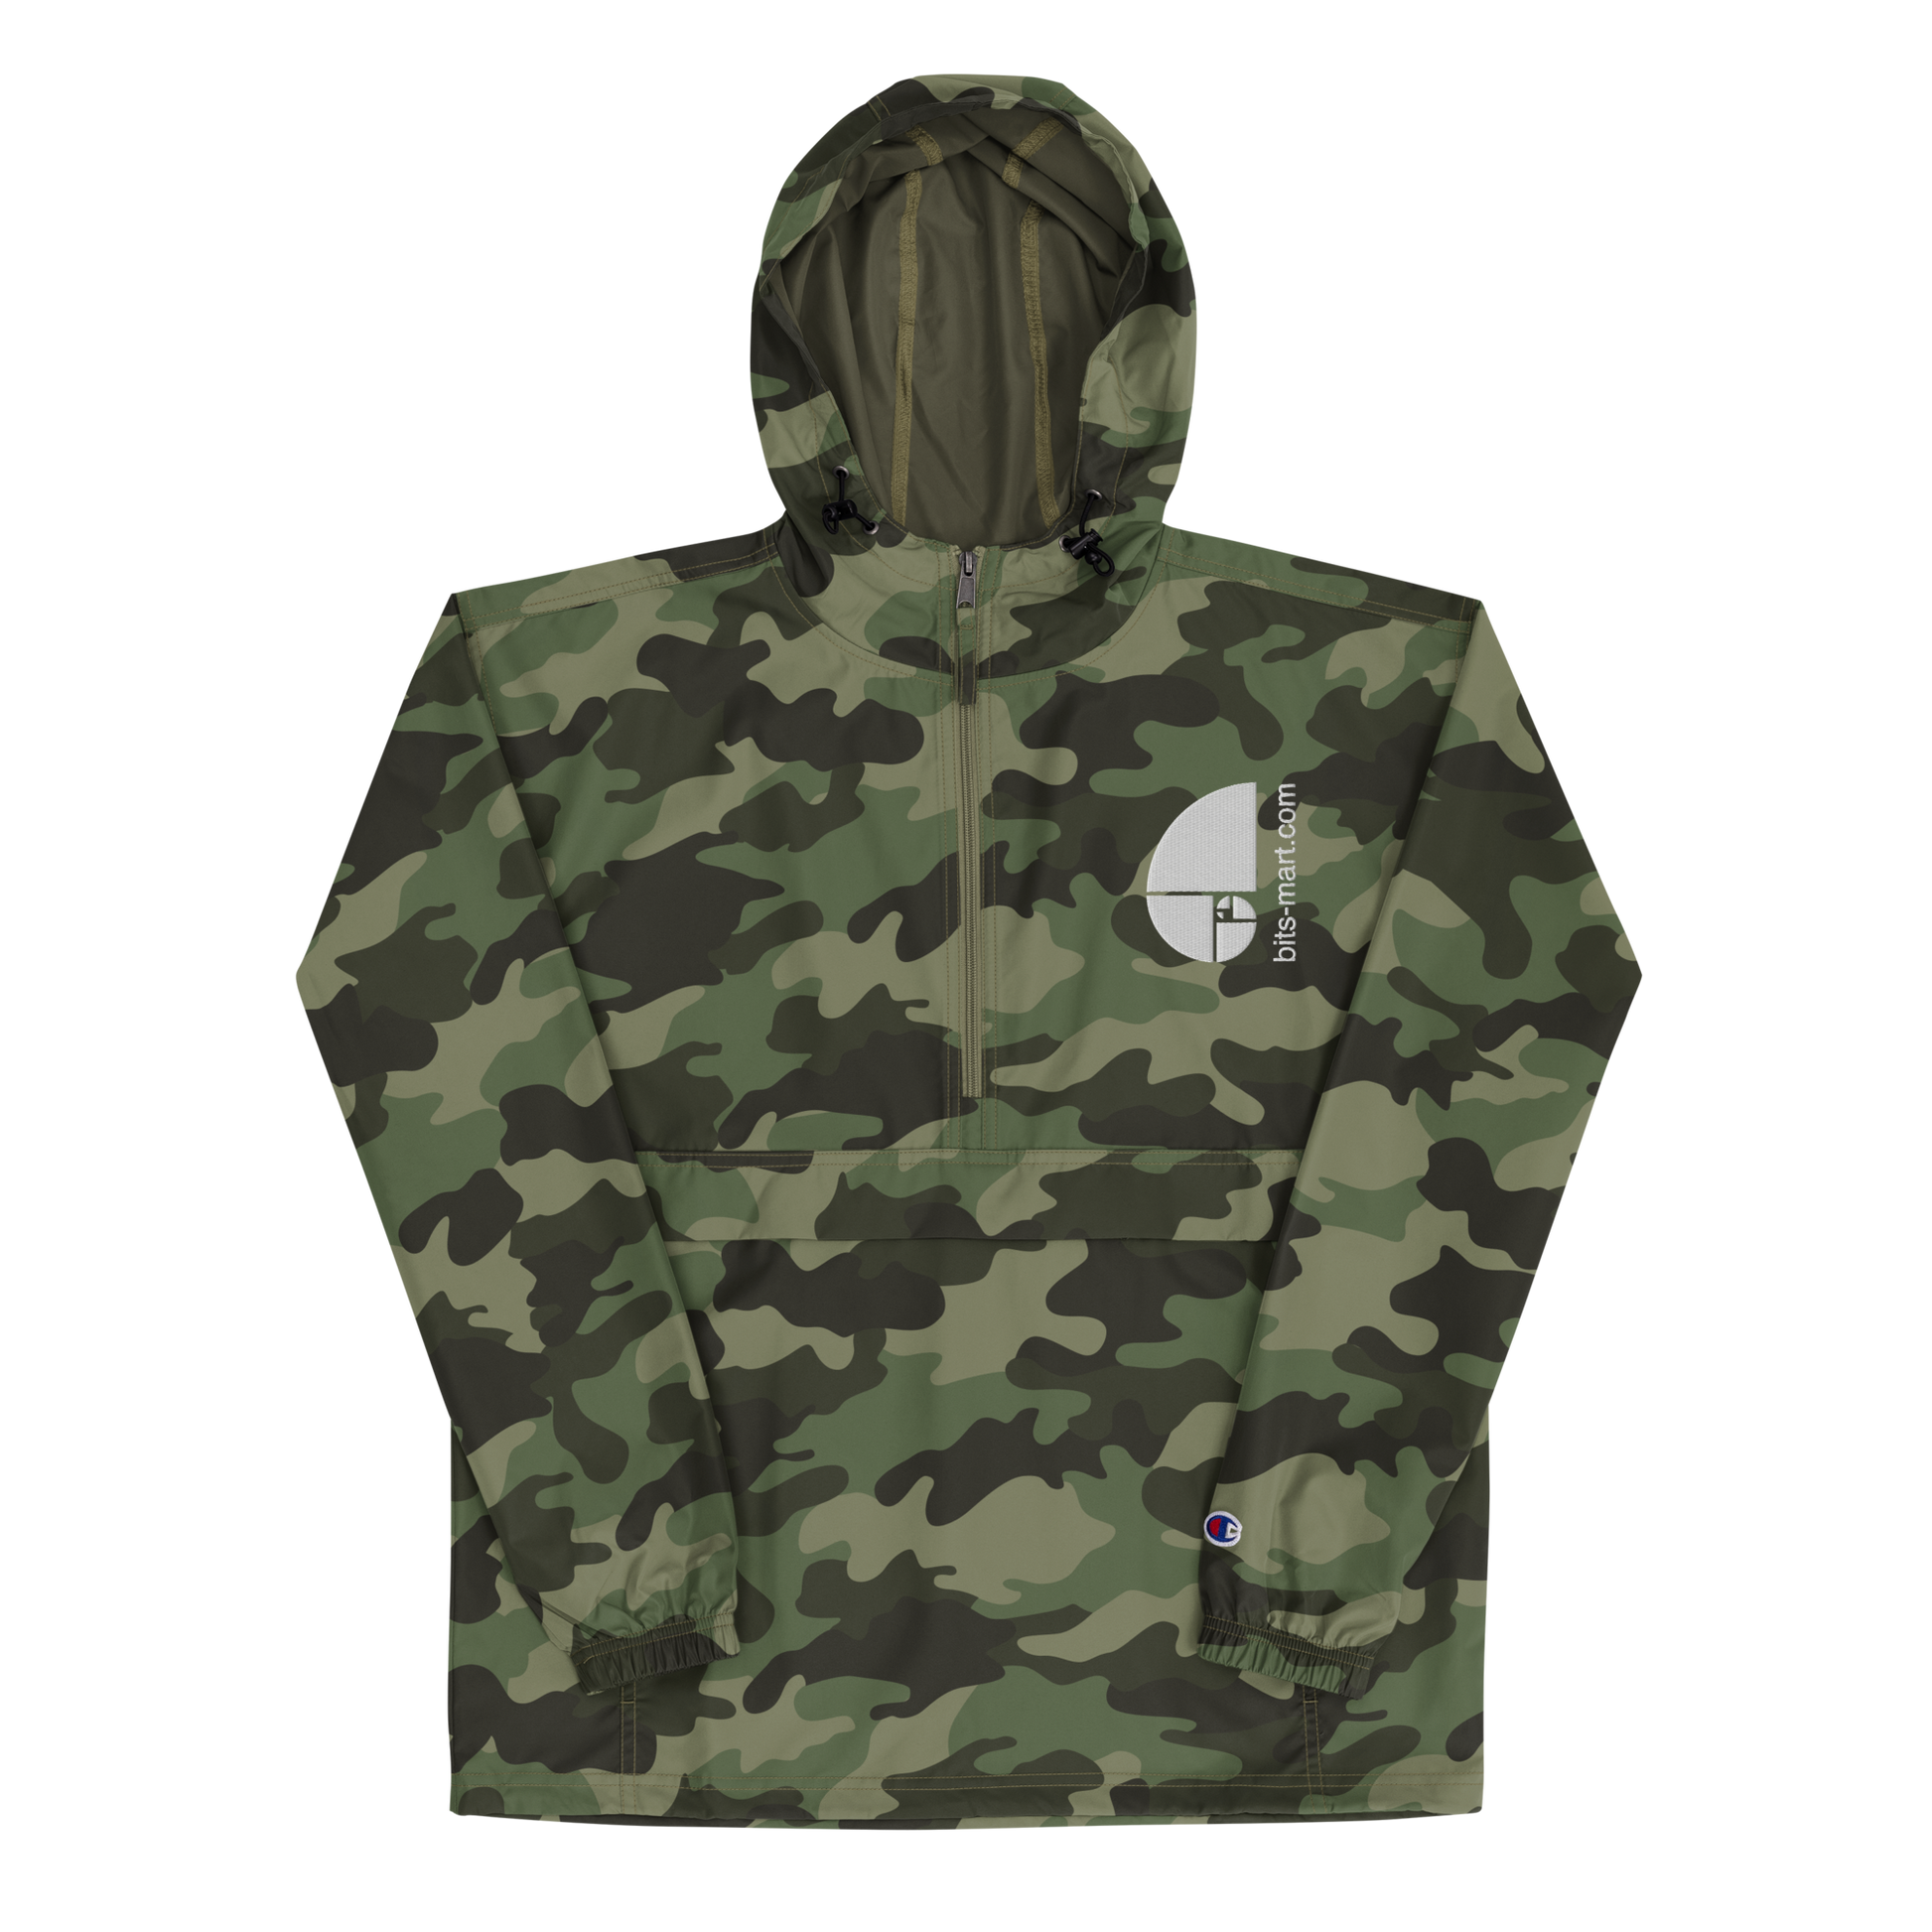 Embroidered Champion Packable Jacket — Olive Green Camo